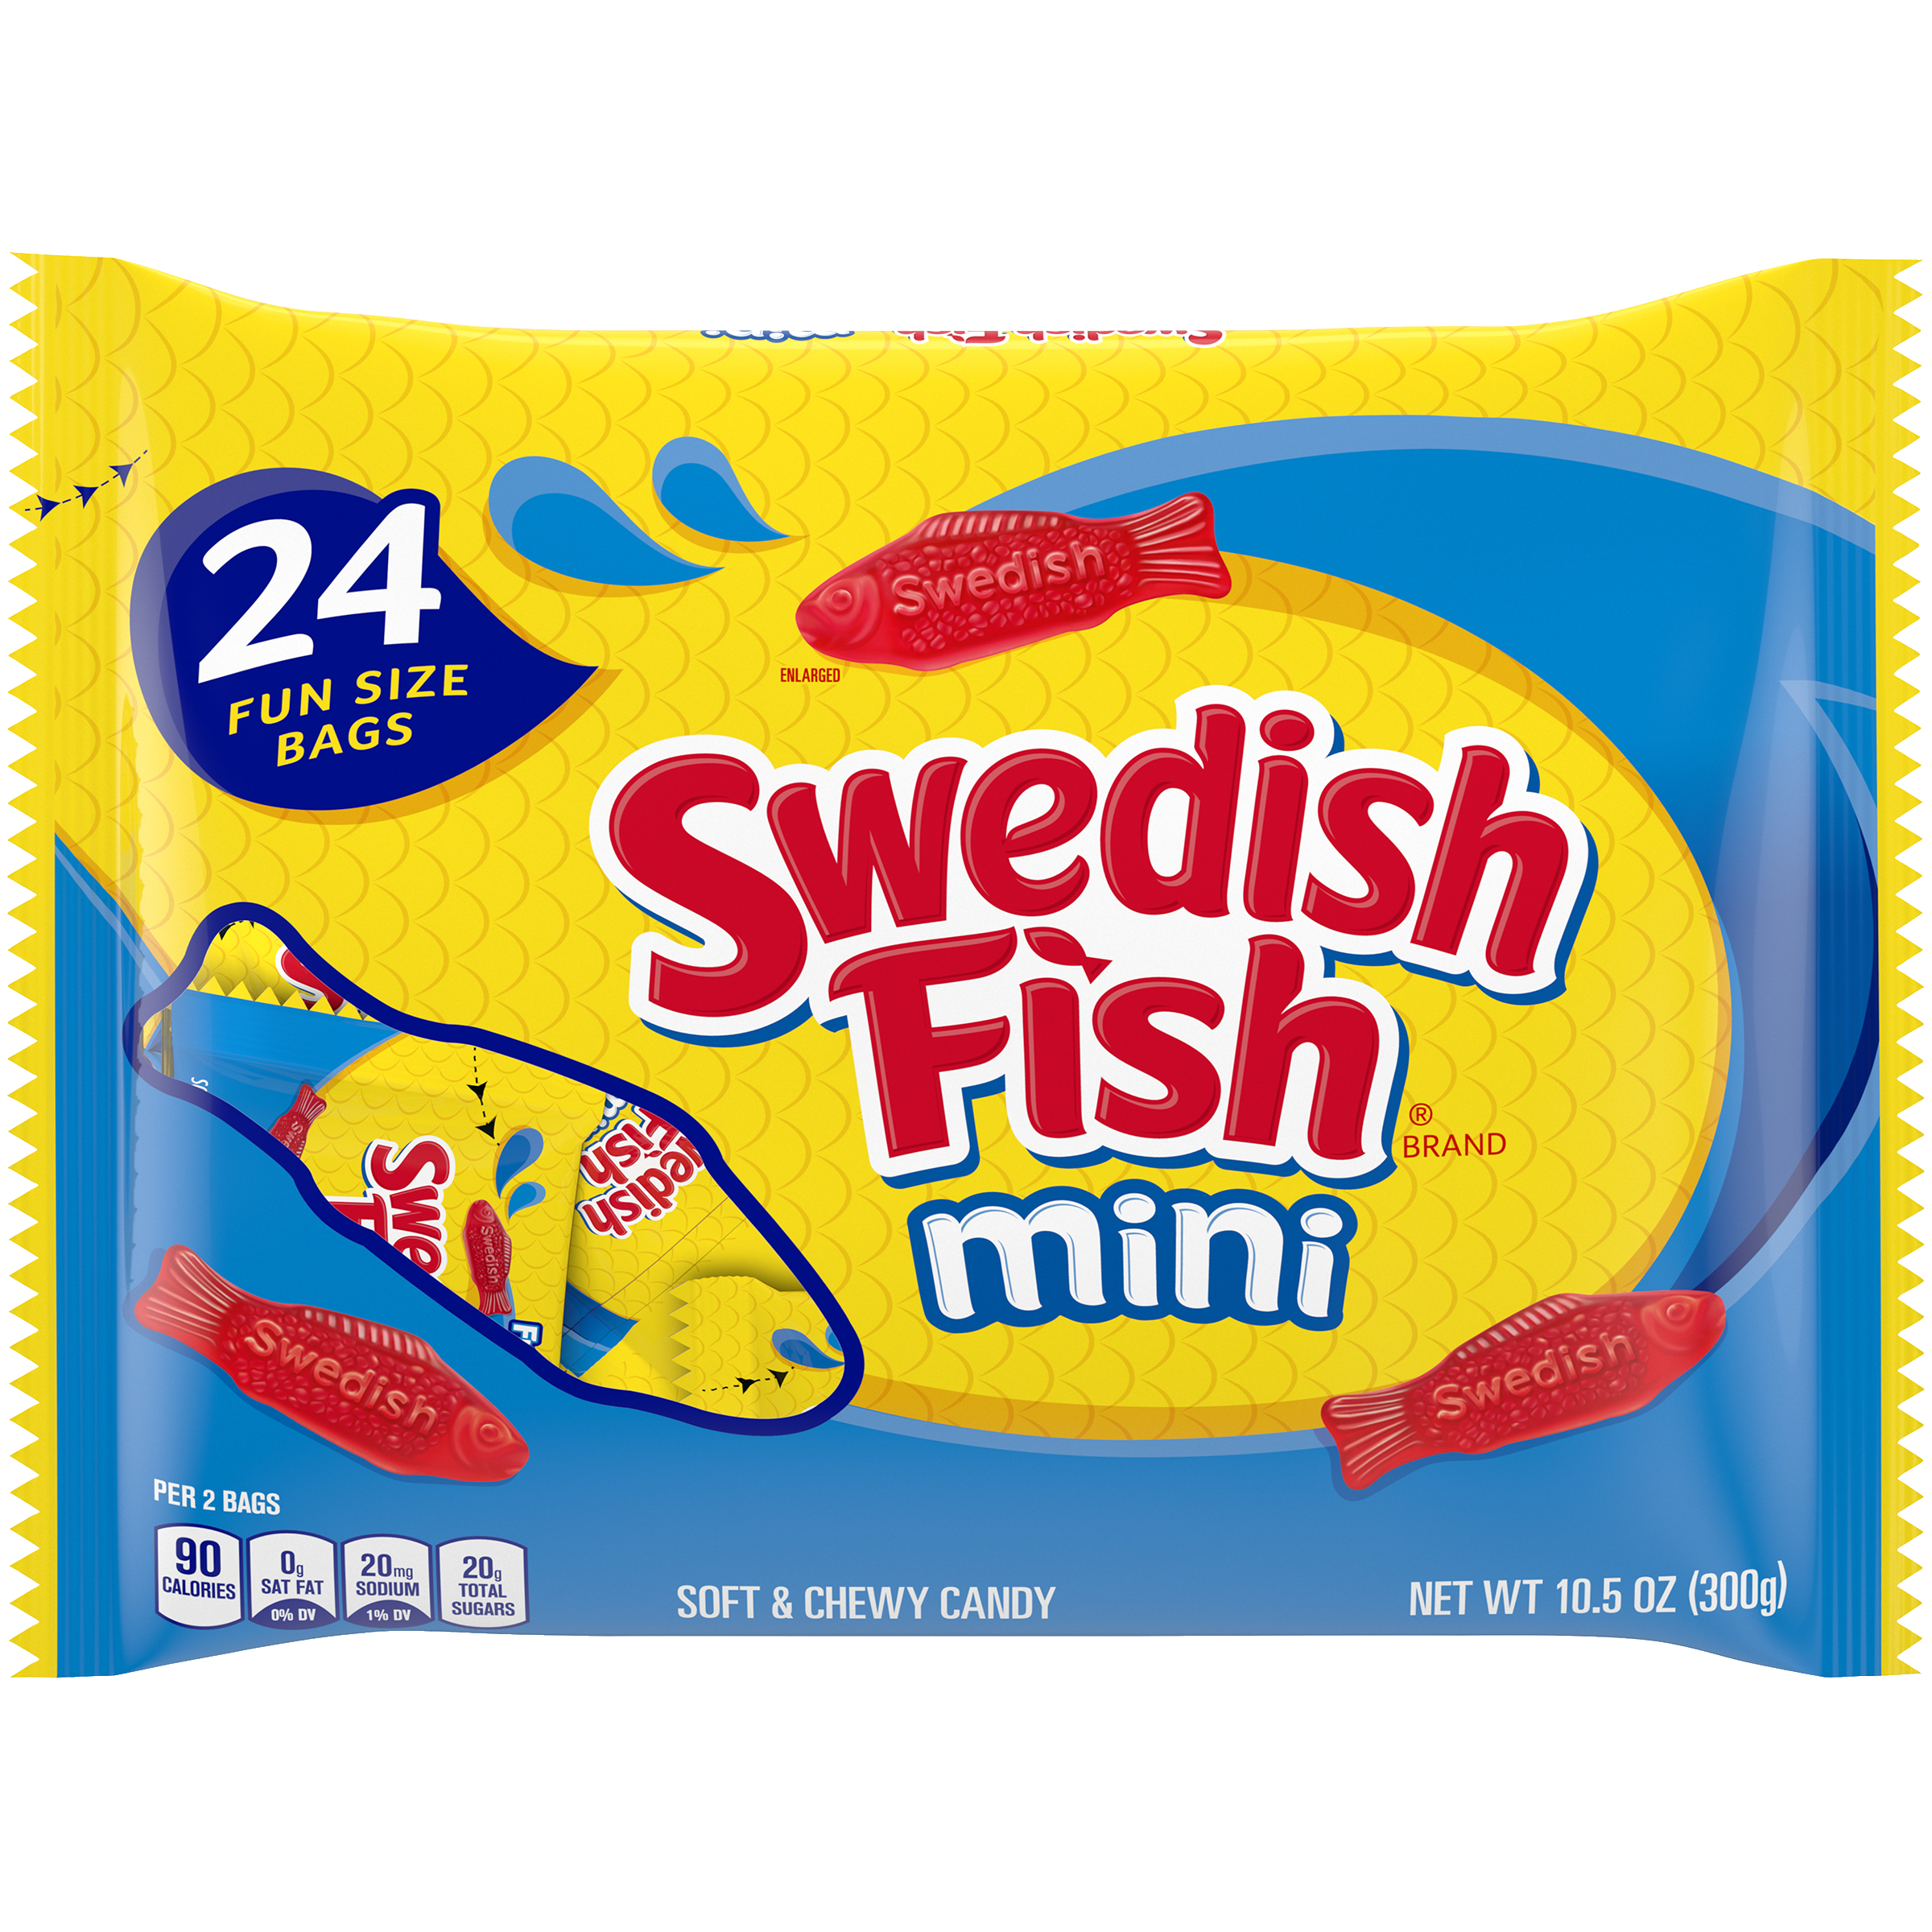 SWEDISH FISH Mini Soft & Chewy Candy, 24 Snack Packs